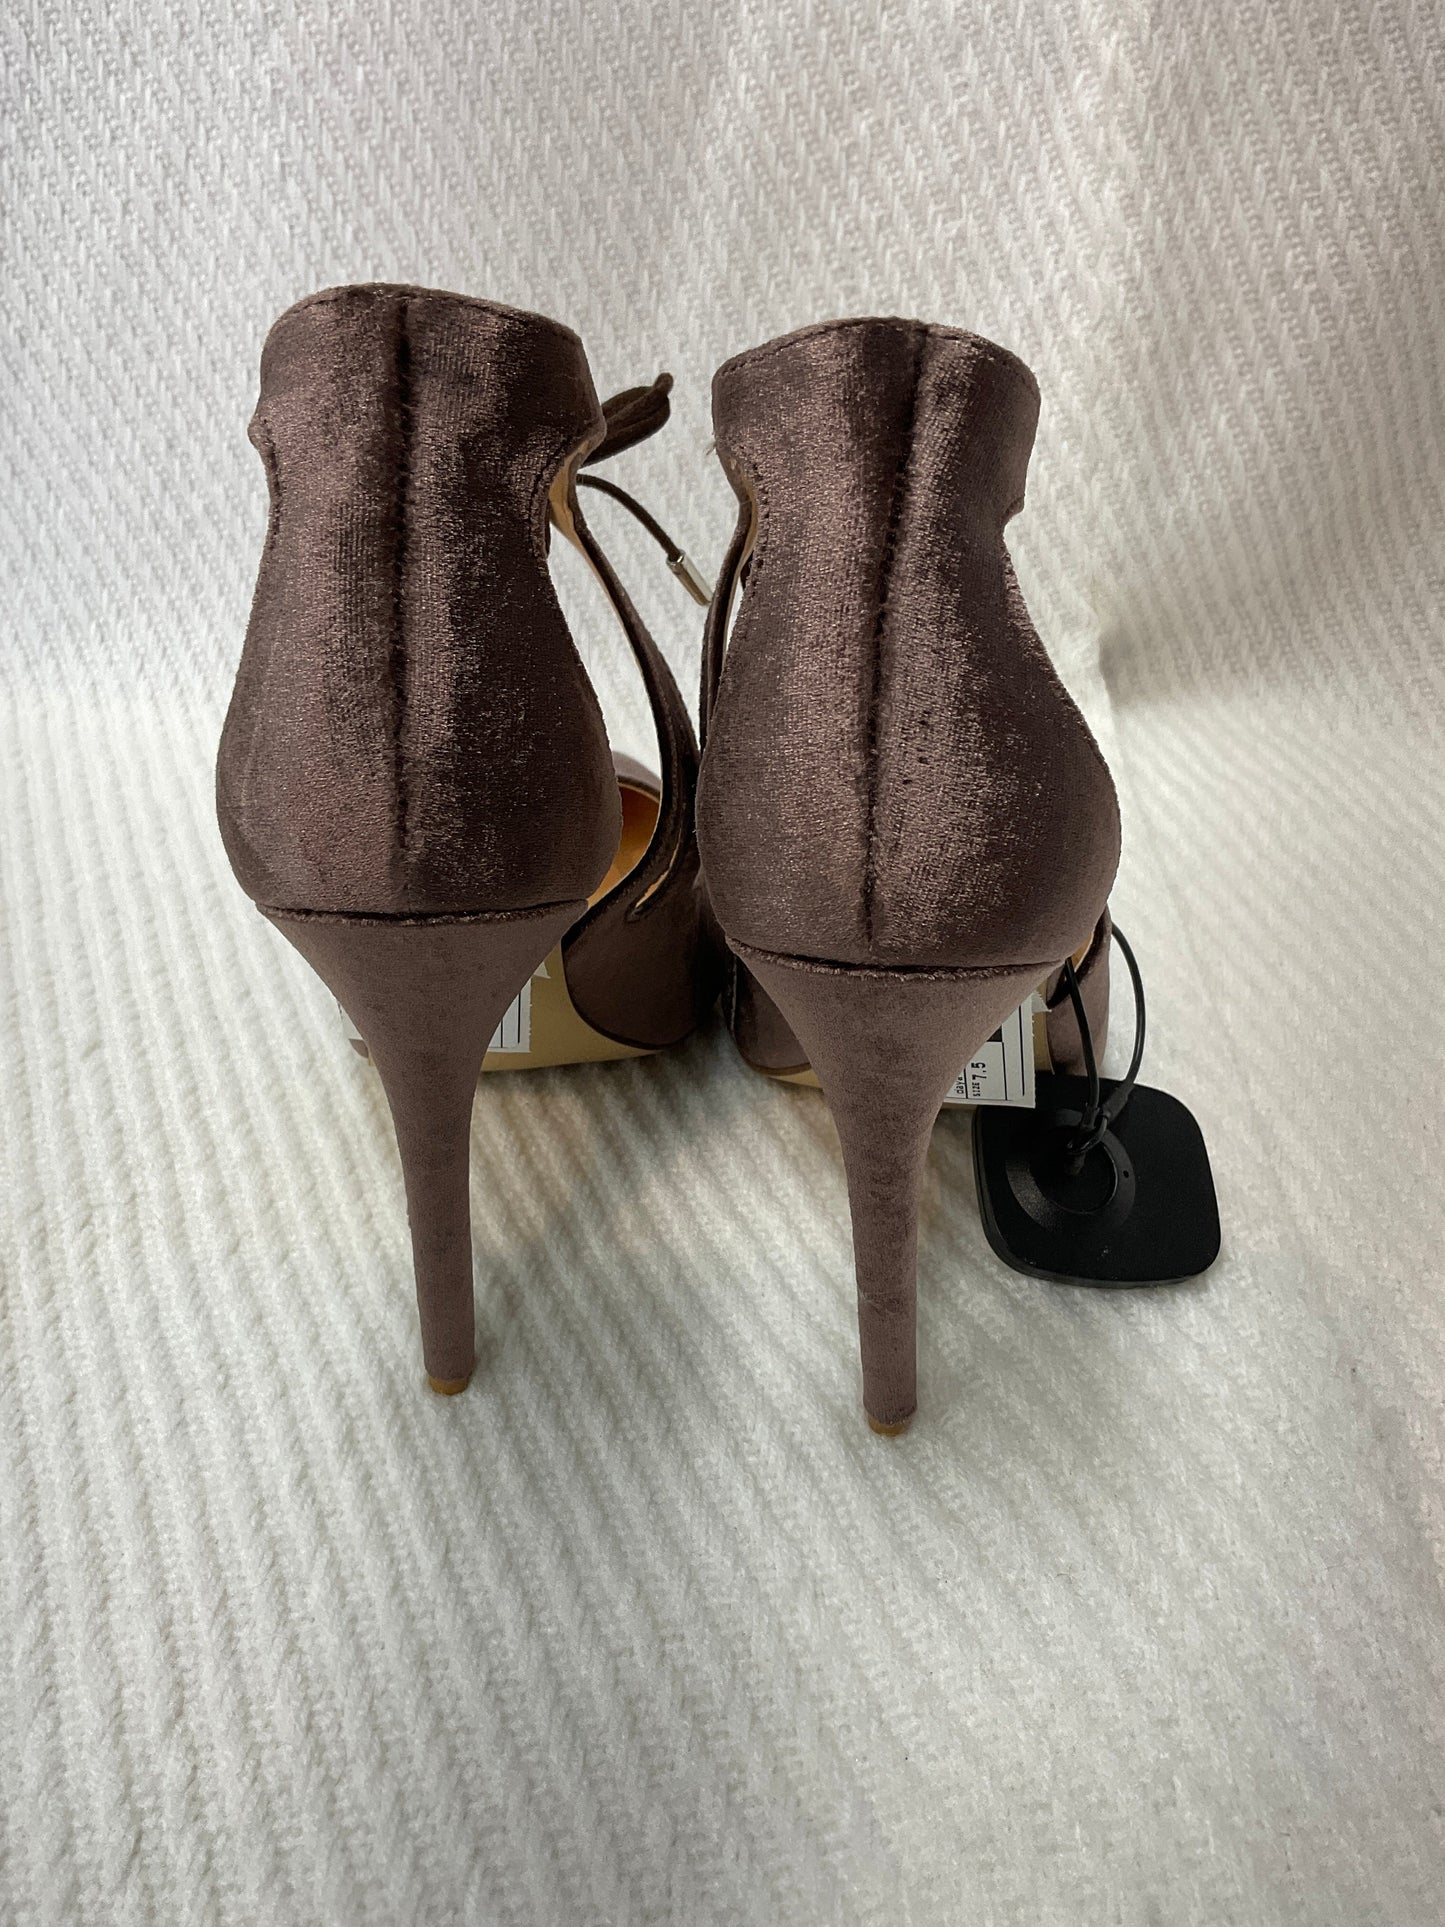 Shoes Heels Stiletto By Clothes Mentor  Size: 7.5